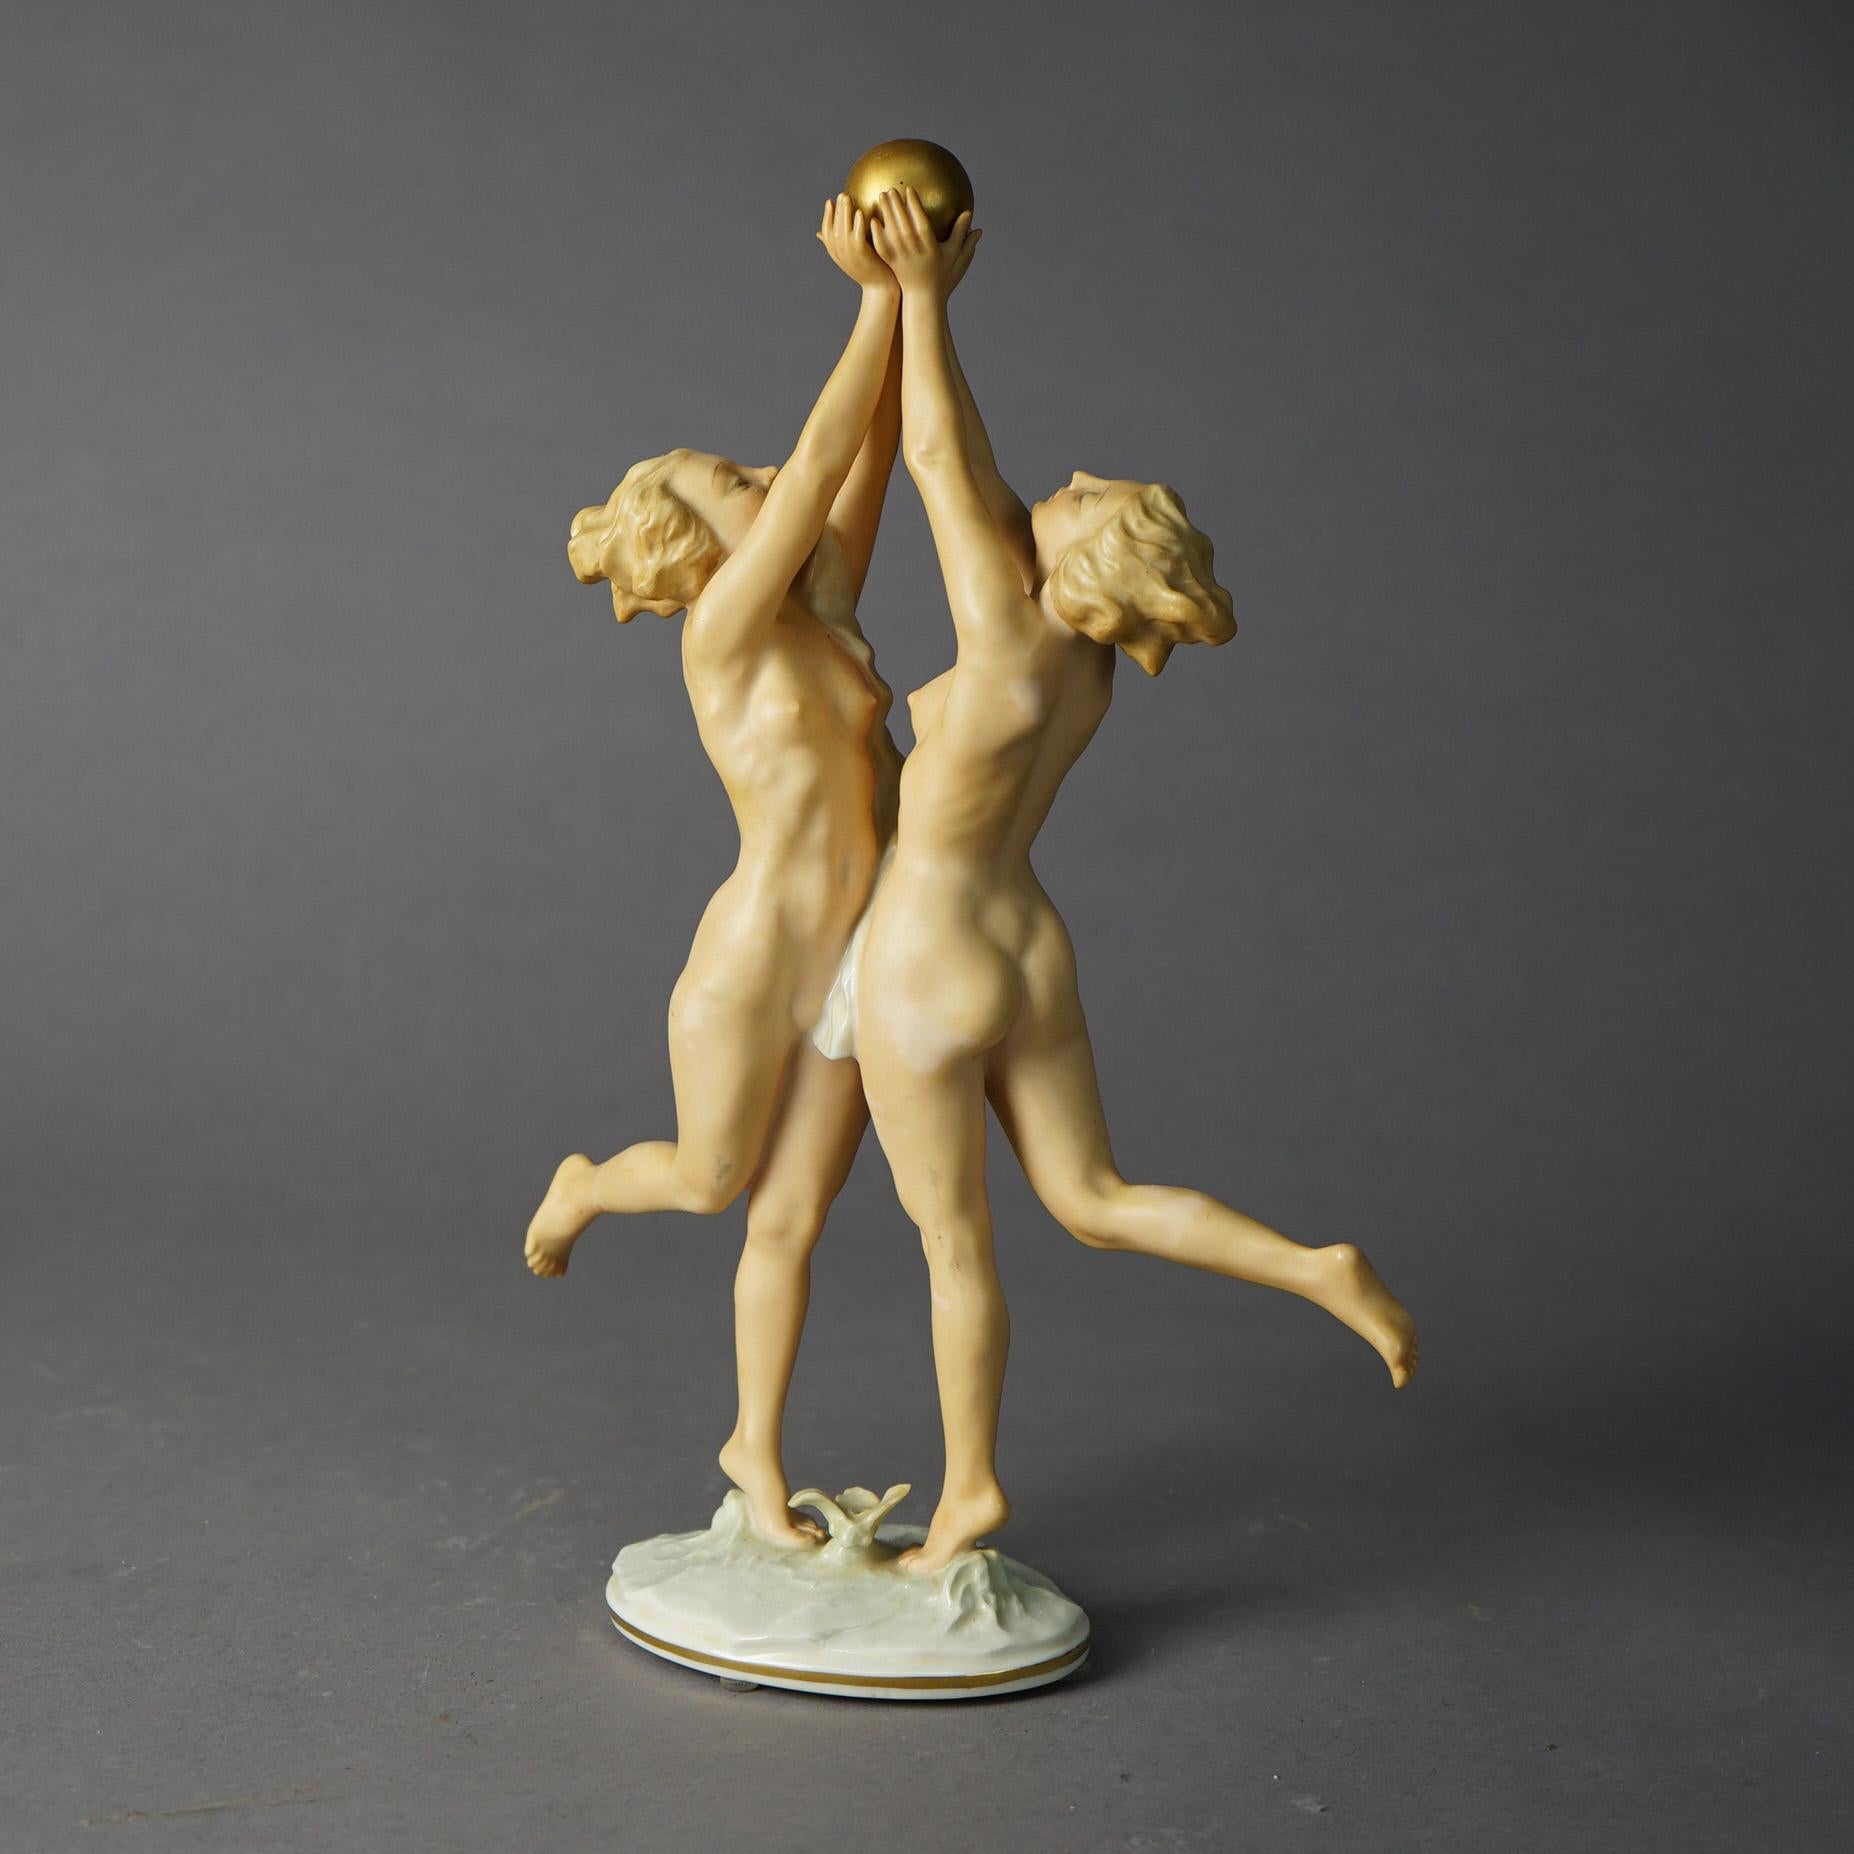 An antique Hutschenreuther porcelain grouping of nude women and a gilt ball, maker mark on base as photographed, Karl Tutter, c1920

Measures - 12.75